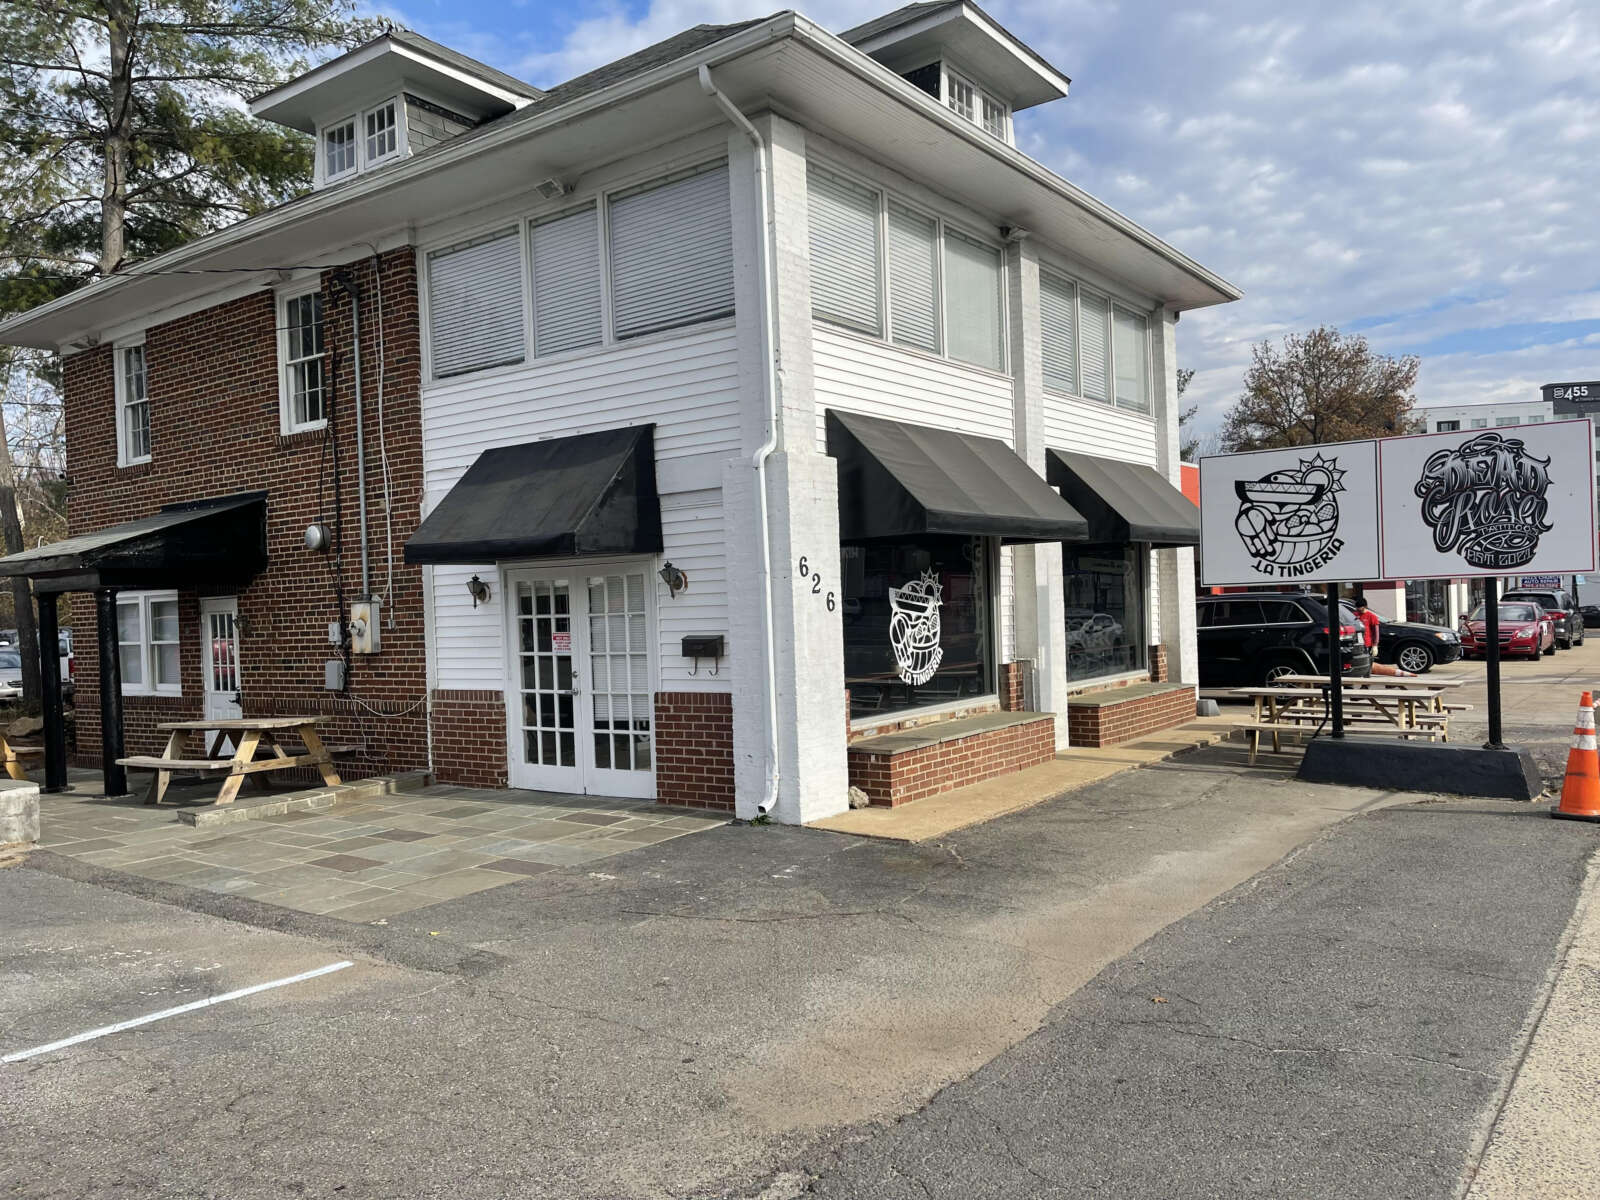 La Tingeria in Falls Church may be forced to close due to neighbor parking complaints